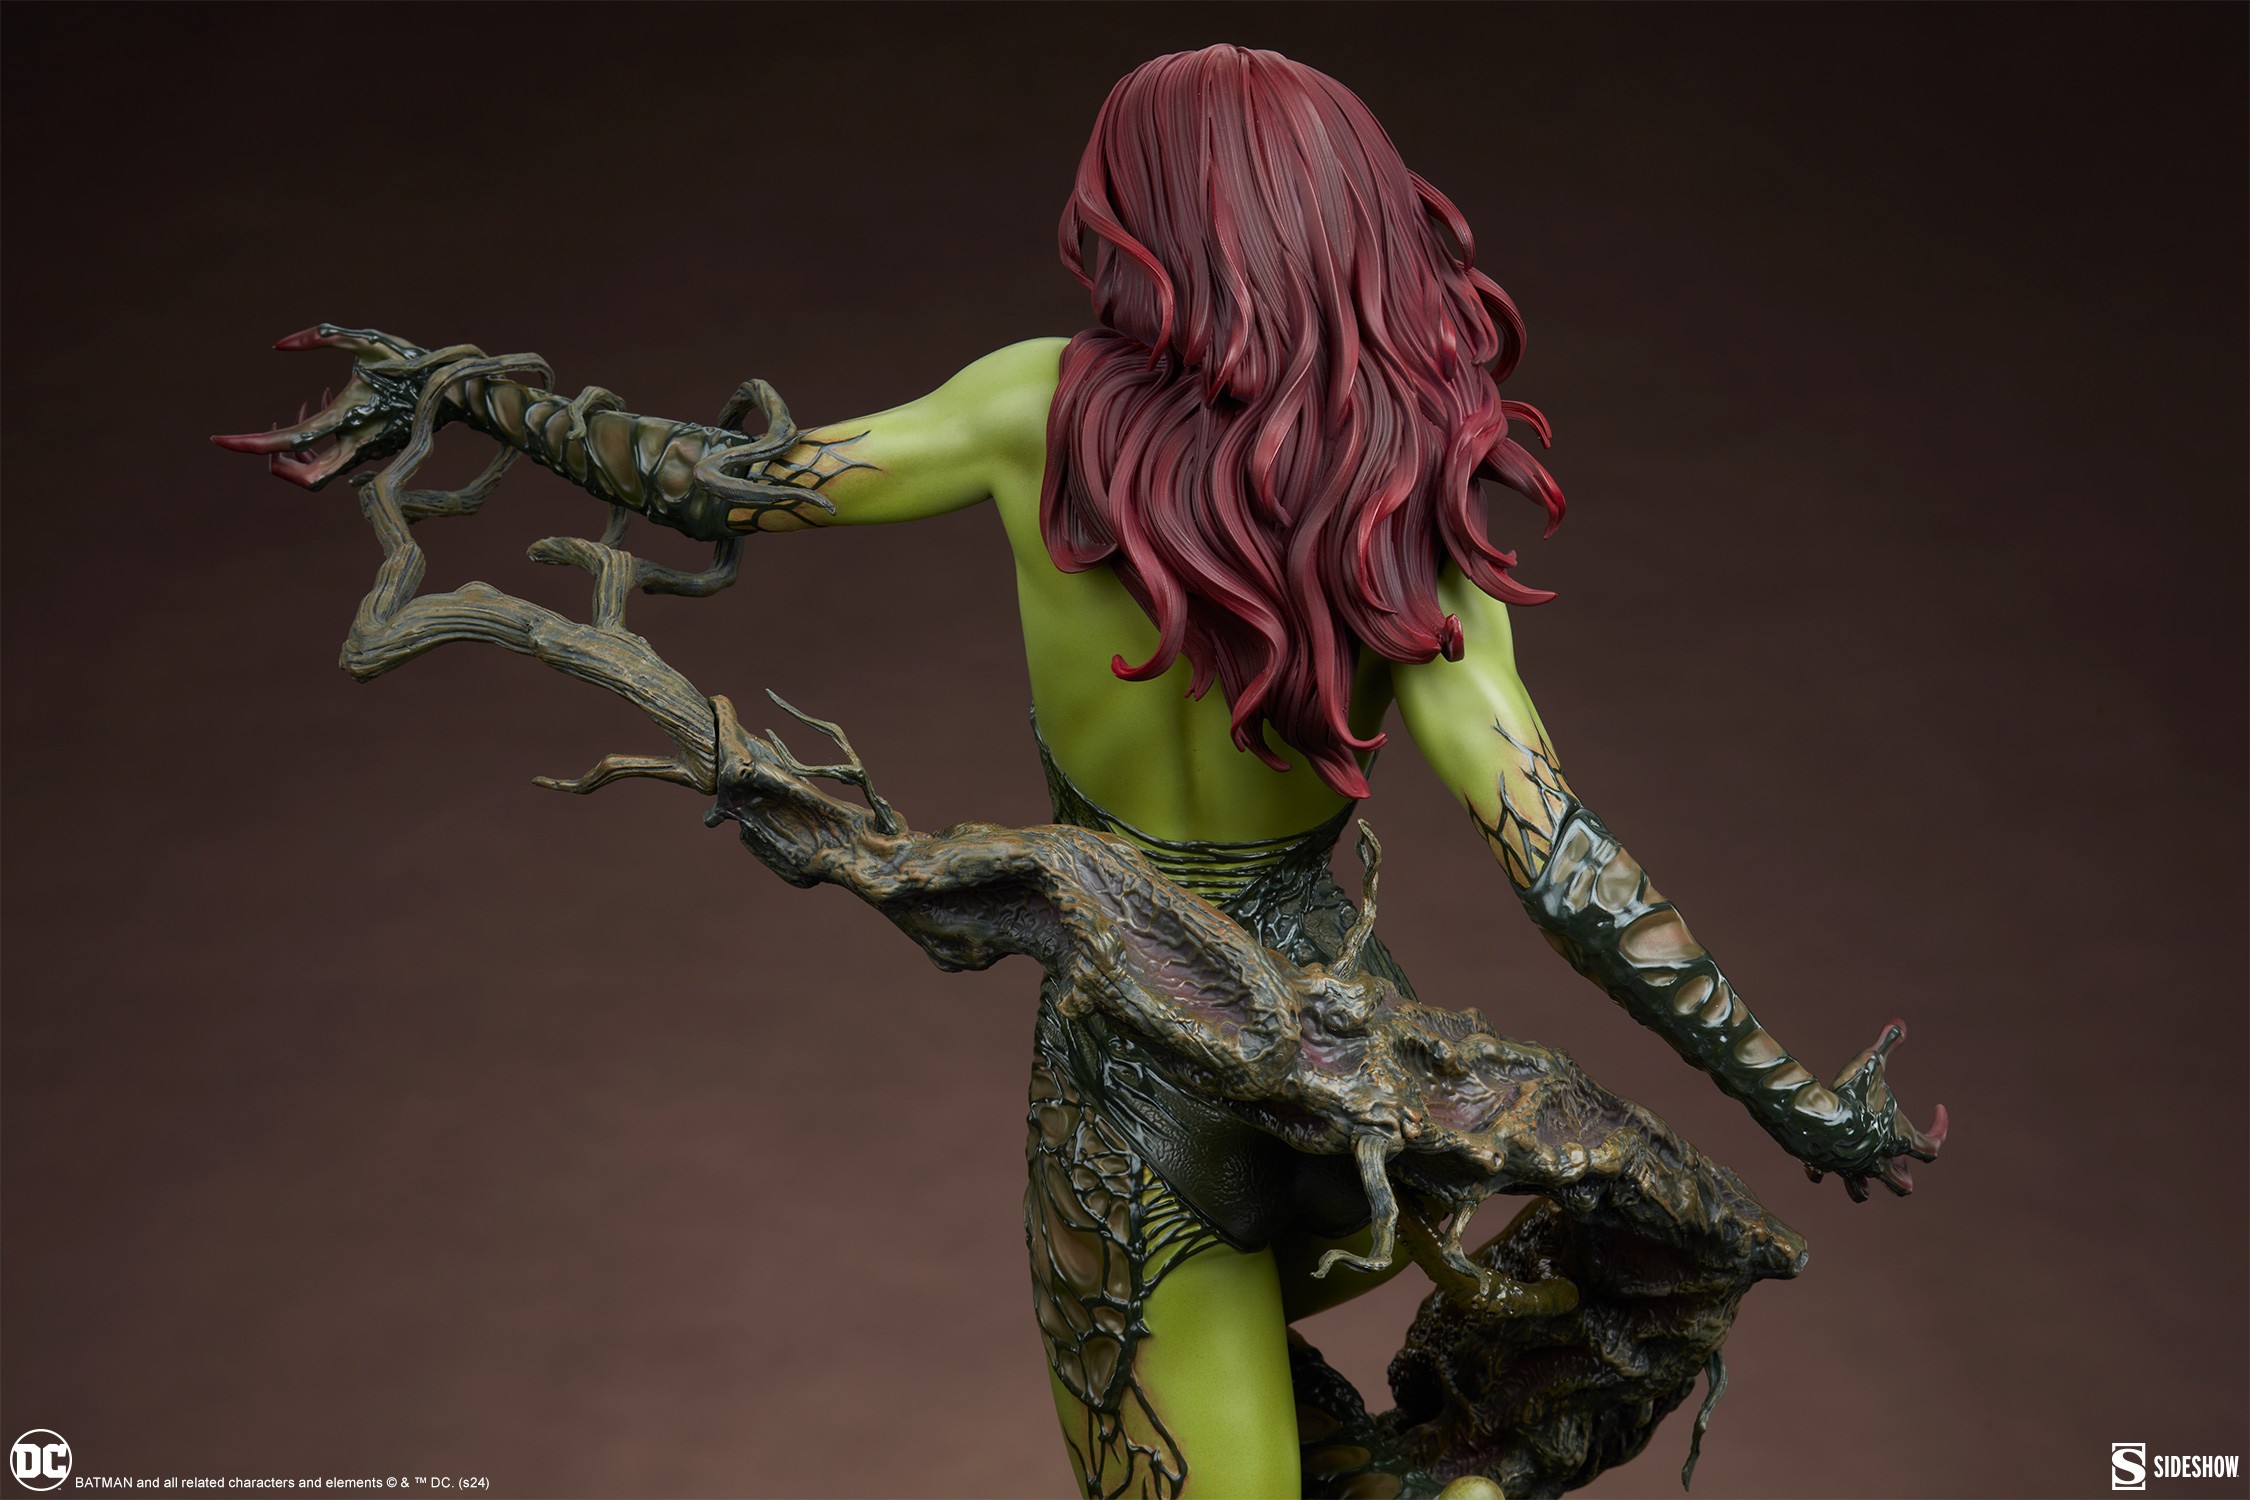 Poison Ivy: Deadly Nature (Green Variant) Exclusive Edition (Prototype Shown) View 17